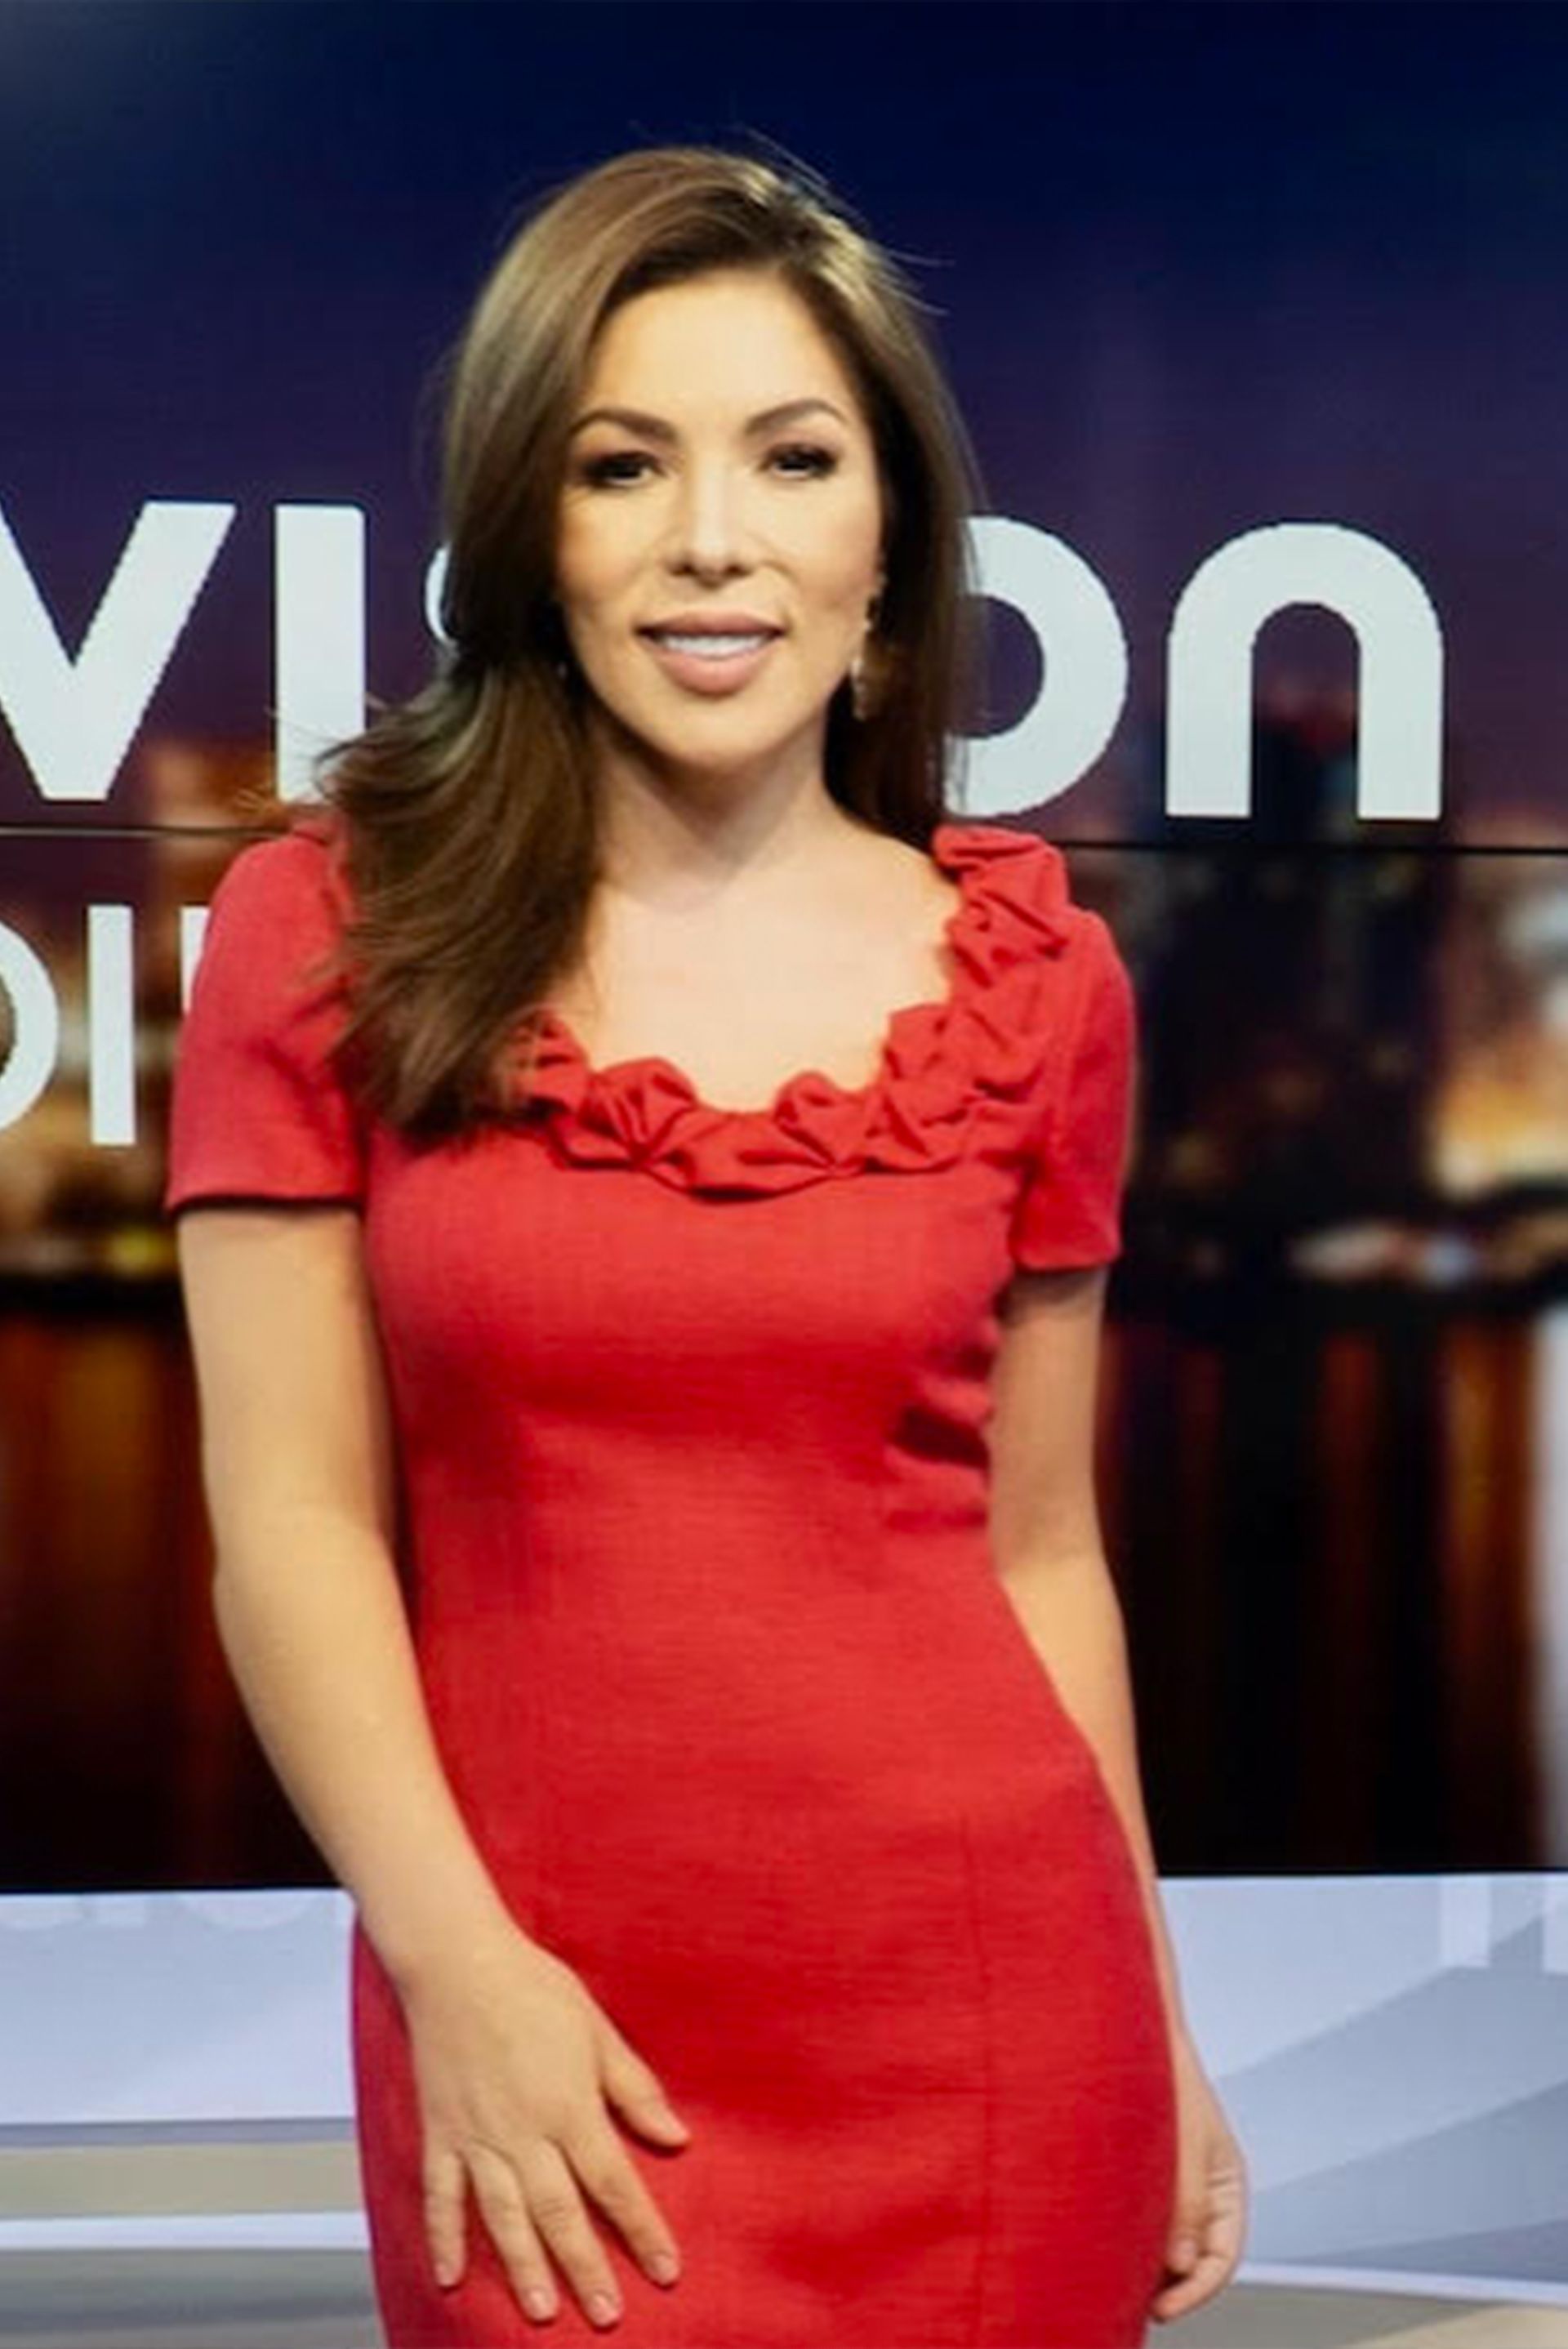 Latina woman in a red dress